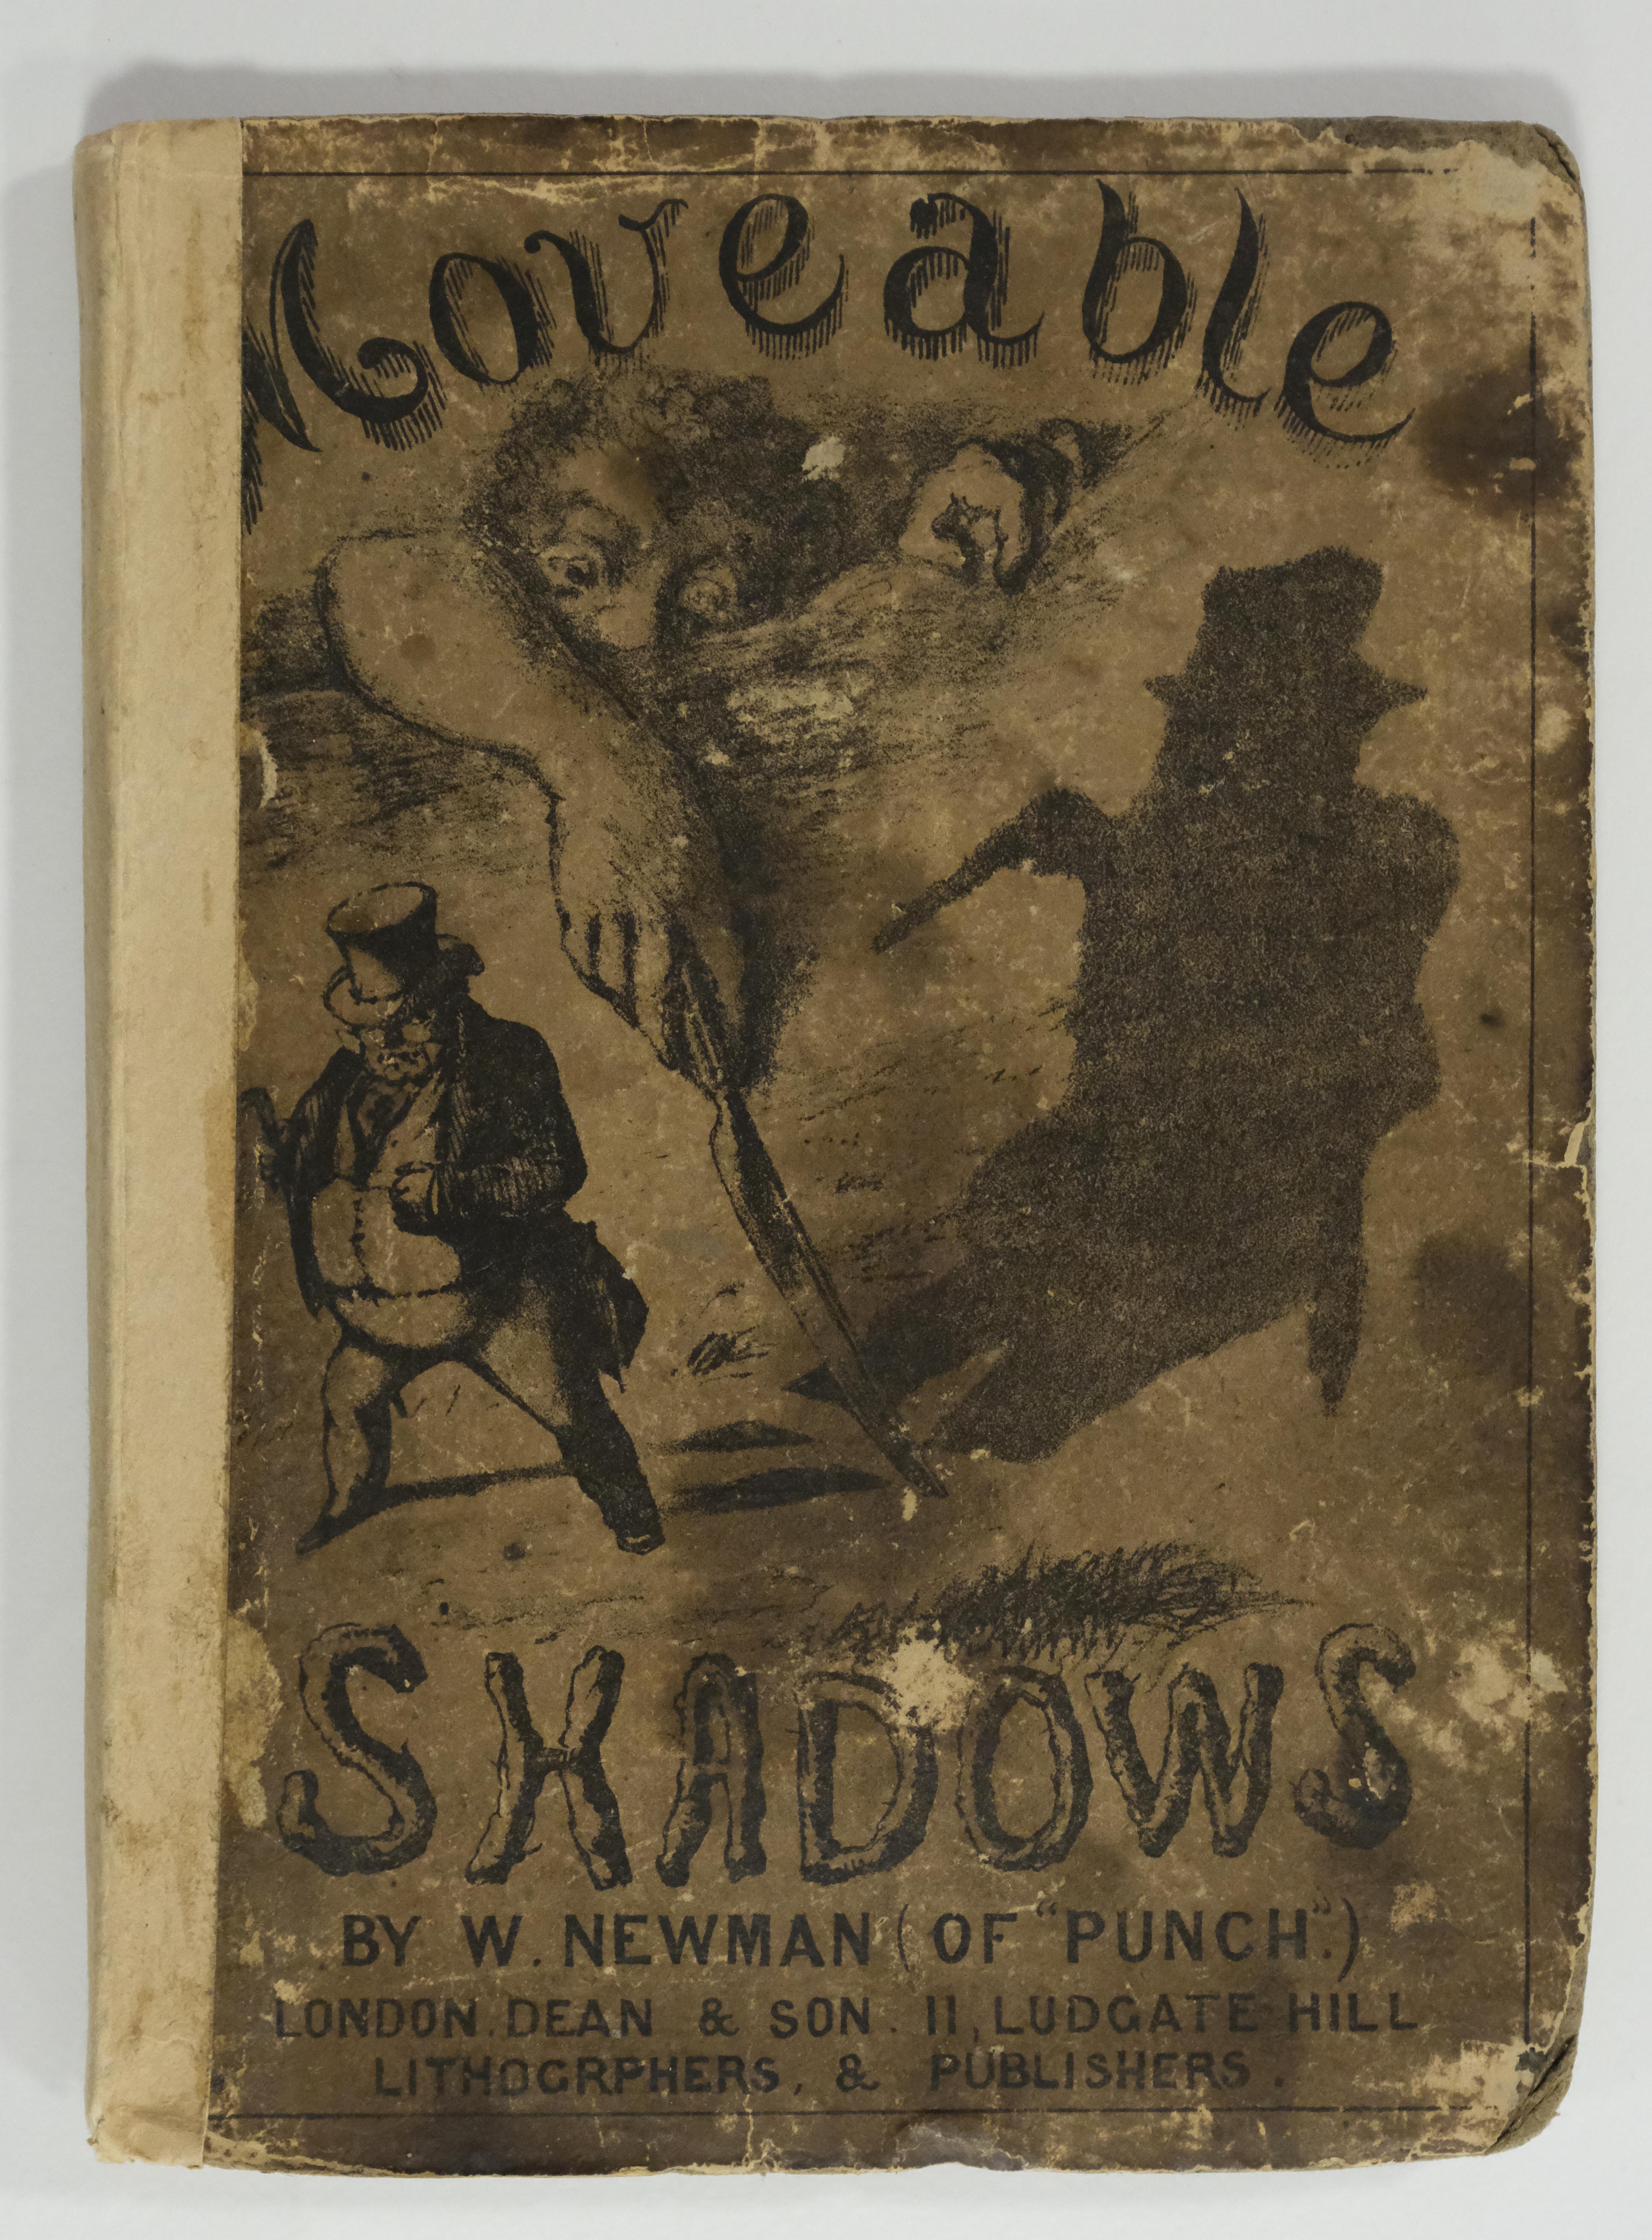 Moveable. Moveable Shadows, by W. Newman (of "Punch"), [1857] - Image 2 of 9